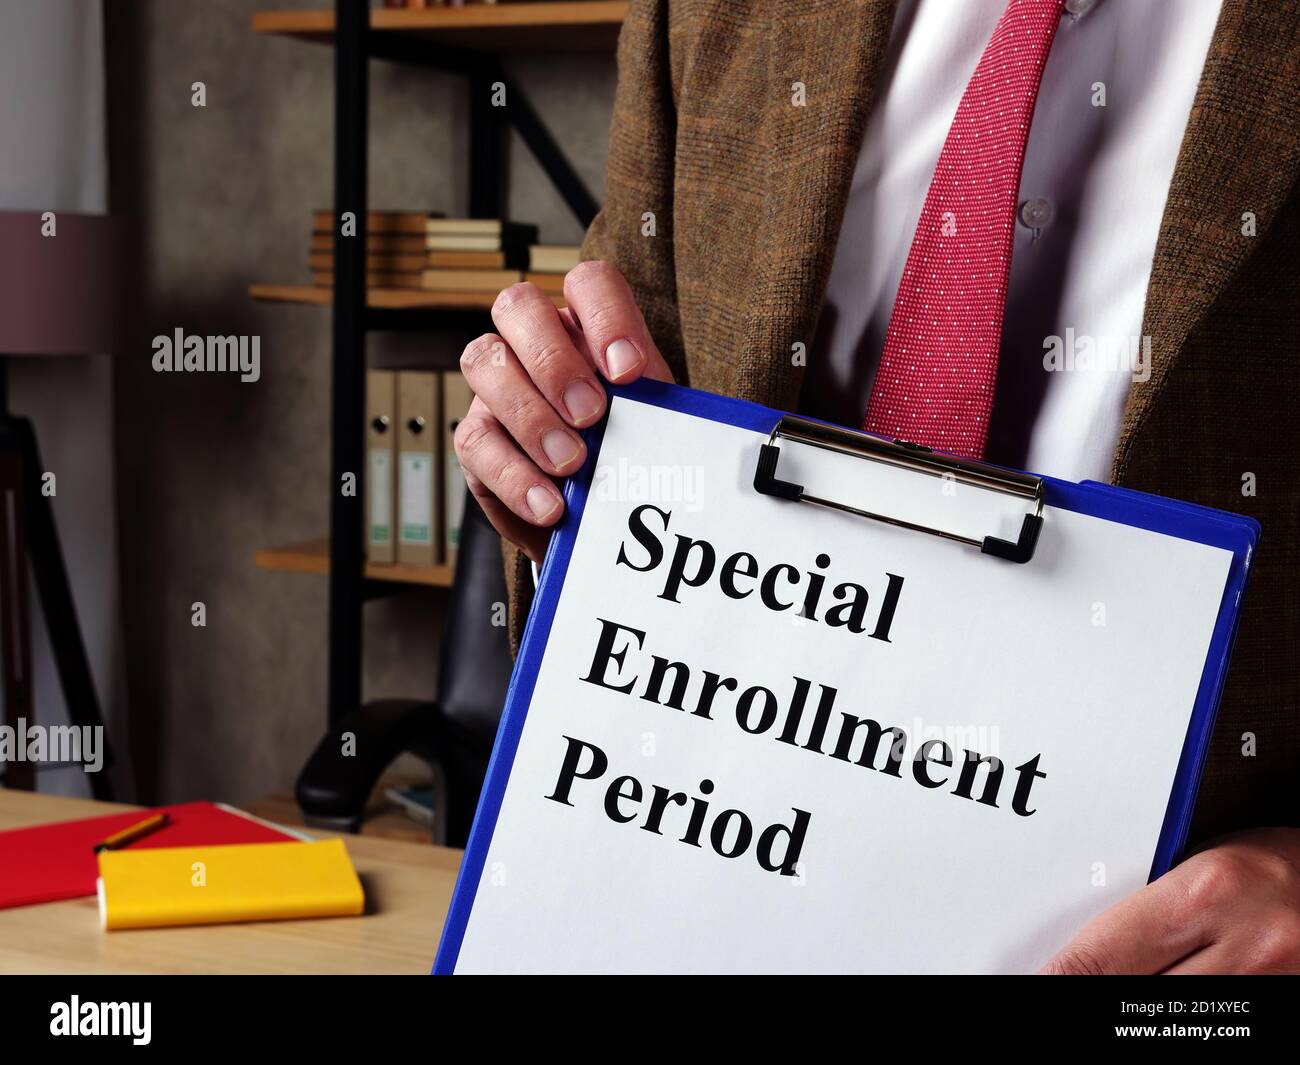 The manager explains about the Special Enrollment Period SEP. Stock Photo